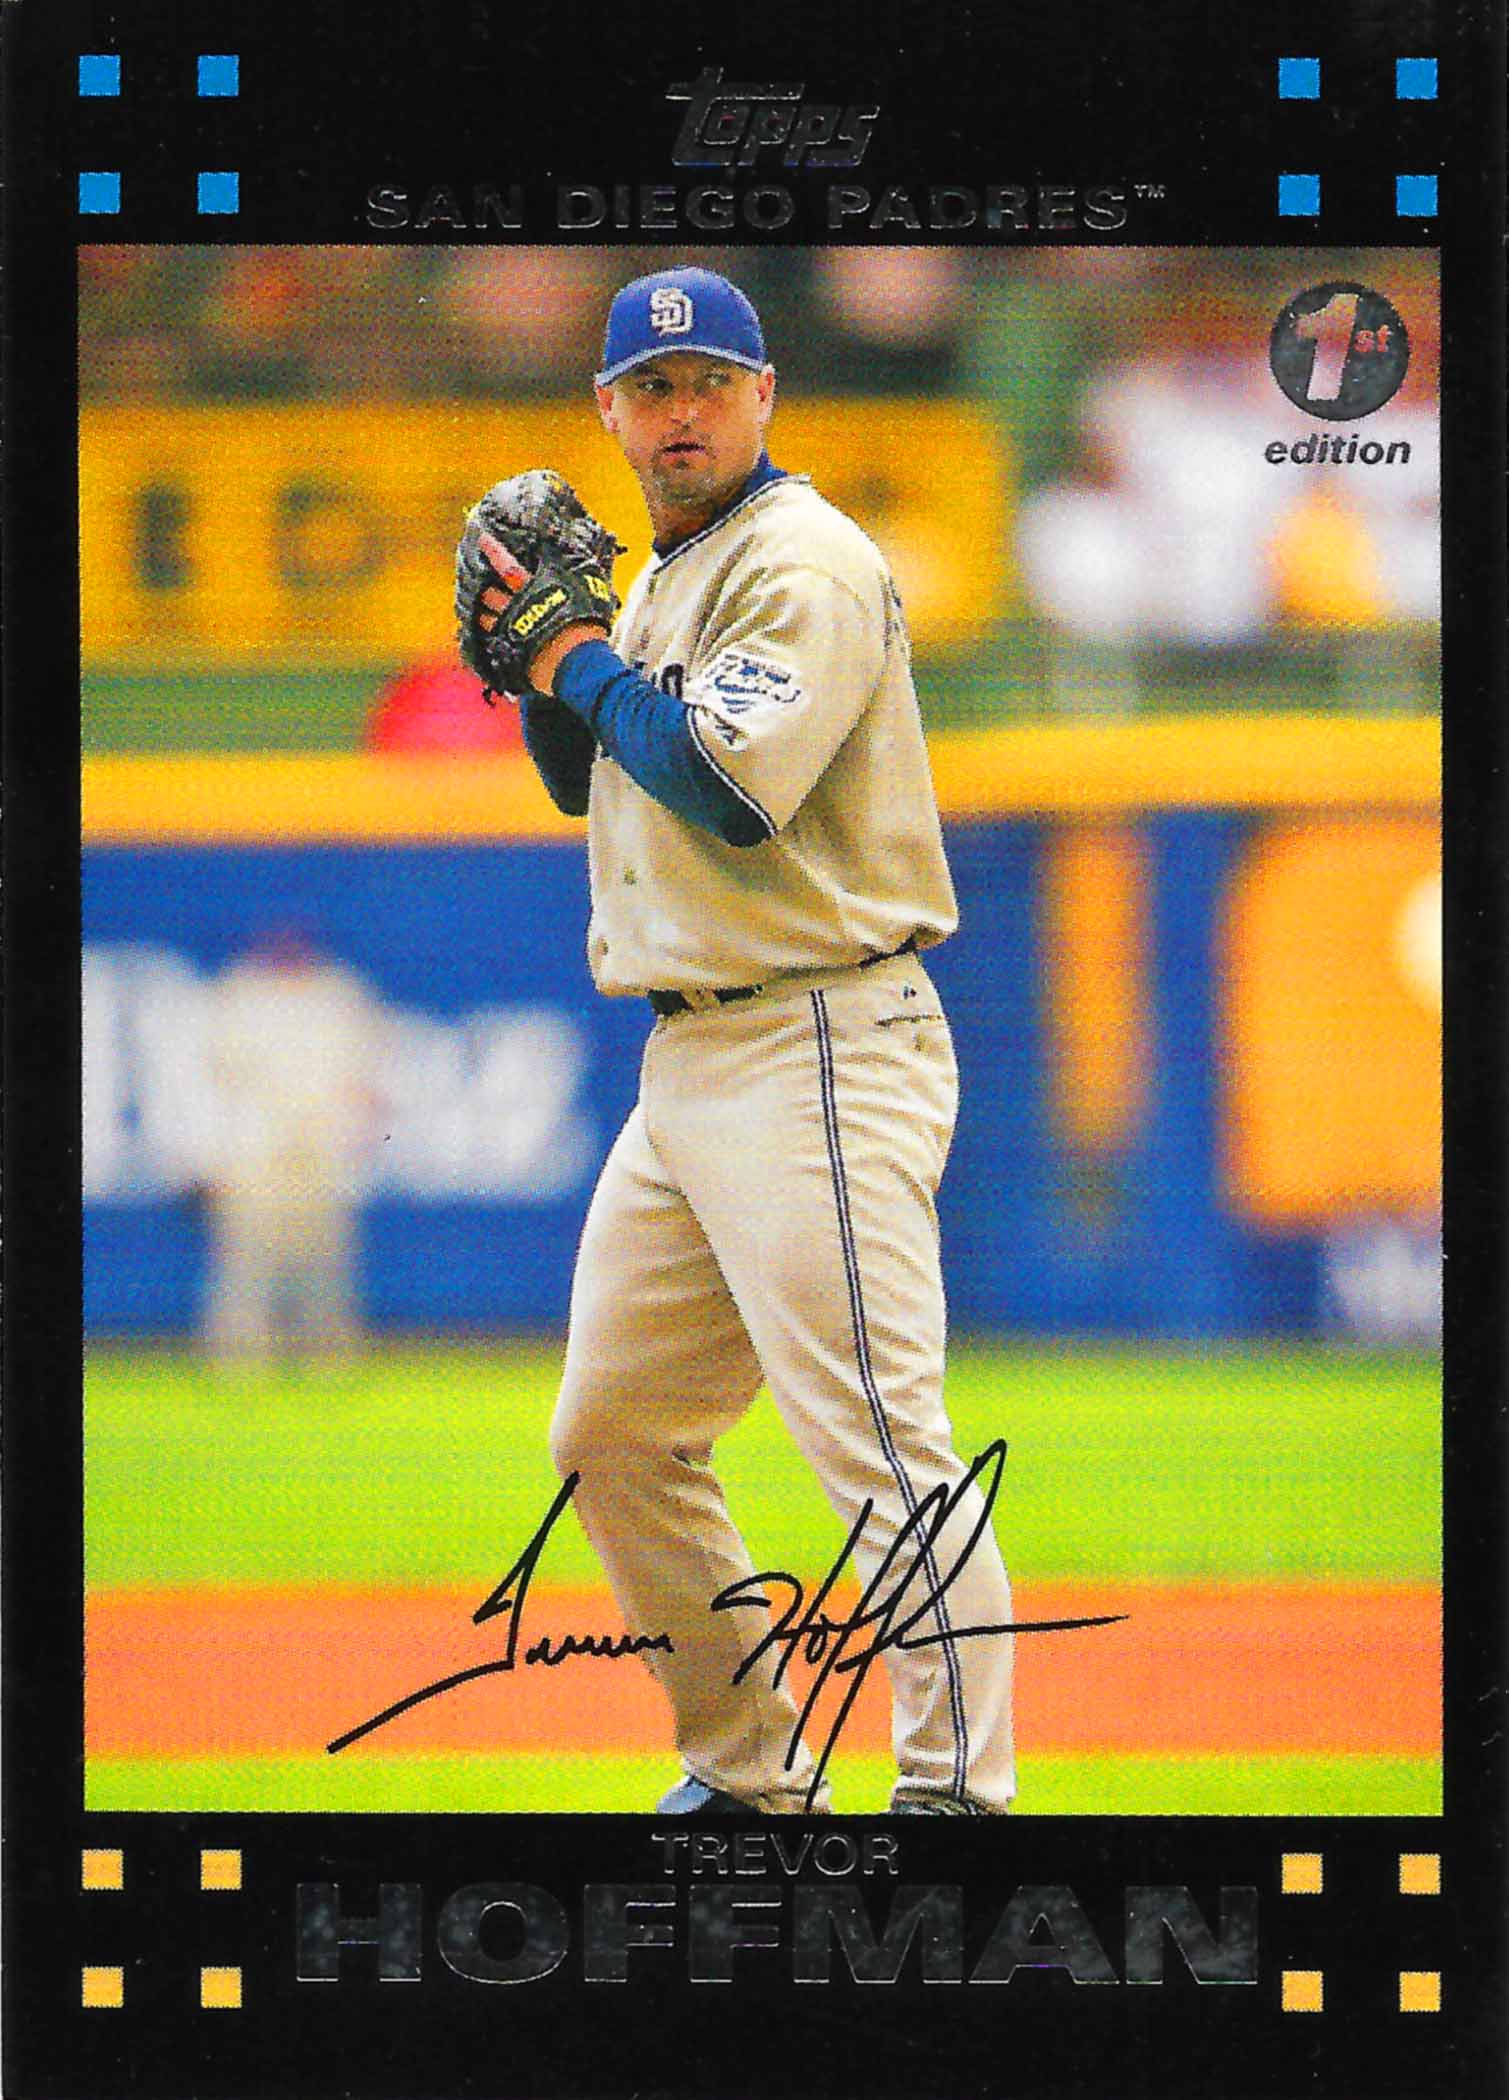 2007 Topps 1st Edition